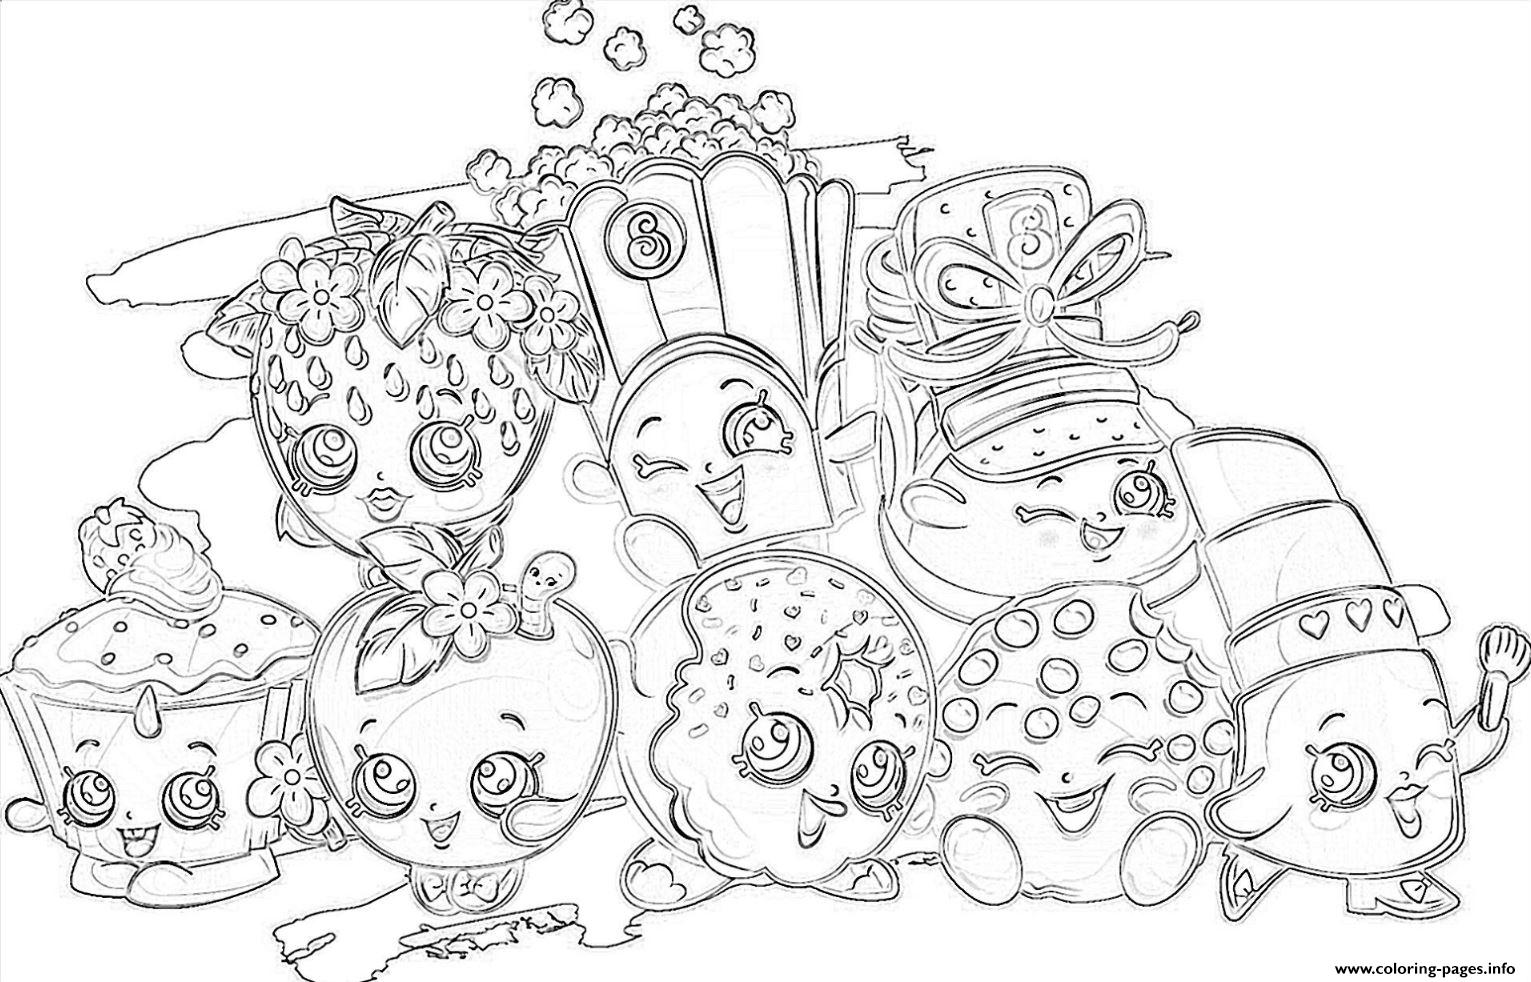 shopkins all the family Coloring pages Printable